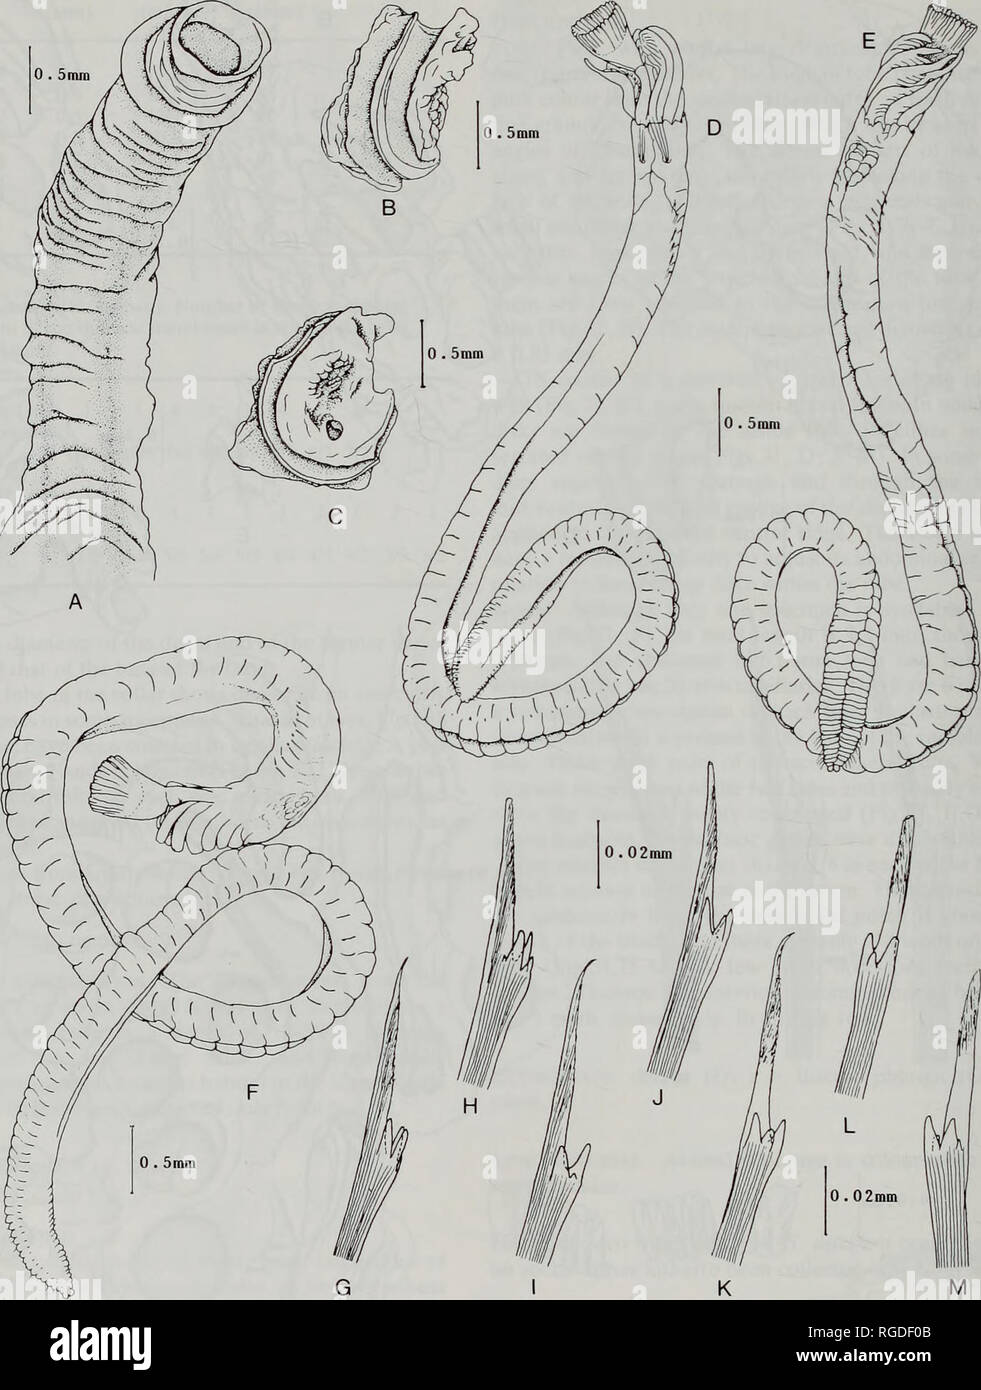 Bulletin Of The Natural History Museum Zoology 96 T G Pillai And Ha Ten Hove Fig 30 Spiraserpula Lineatuba Straughan 1967 A M From Nsw Split Solitary Island A Erect Tube Part Showing